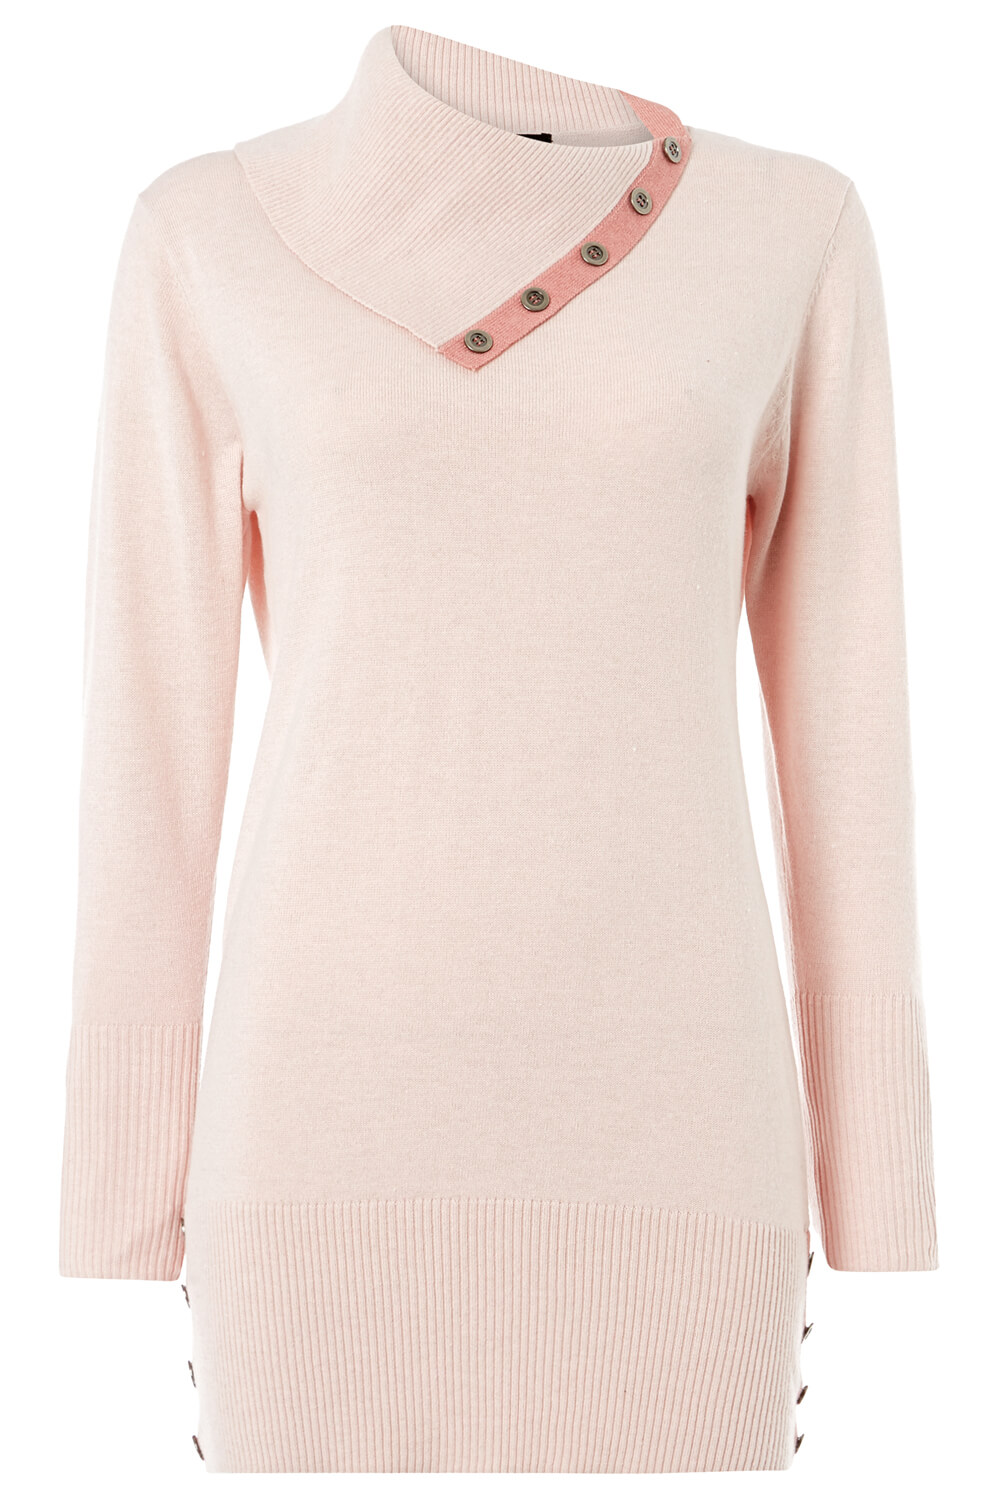 PINK Split Button Neck Tunic Jumper, Image 5 of 5